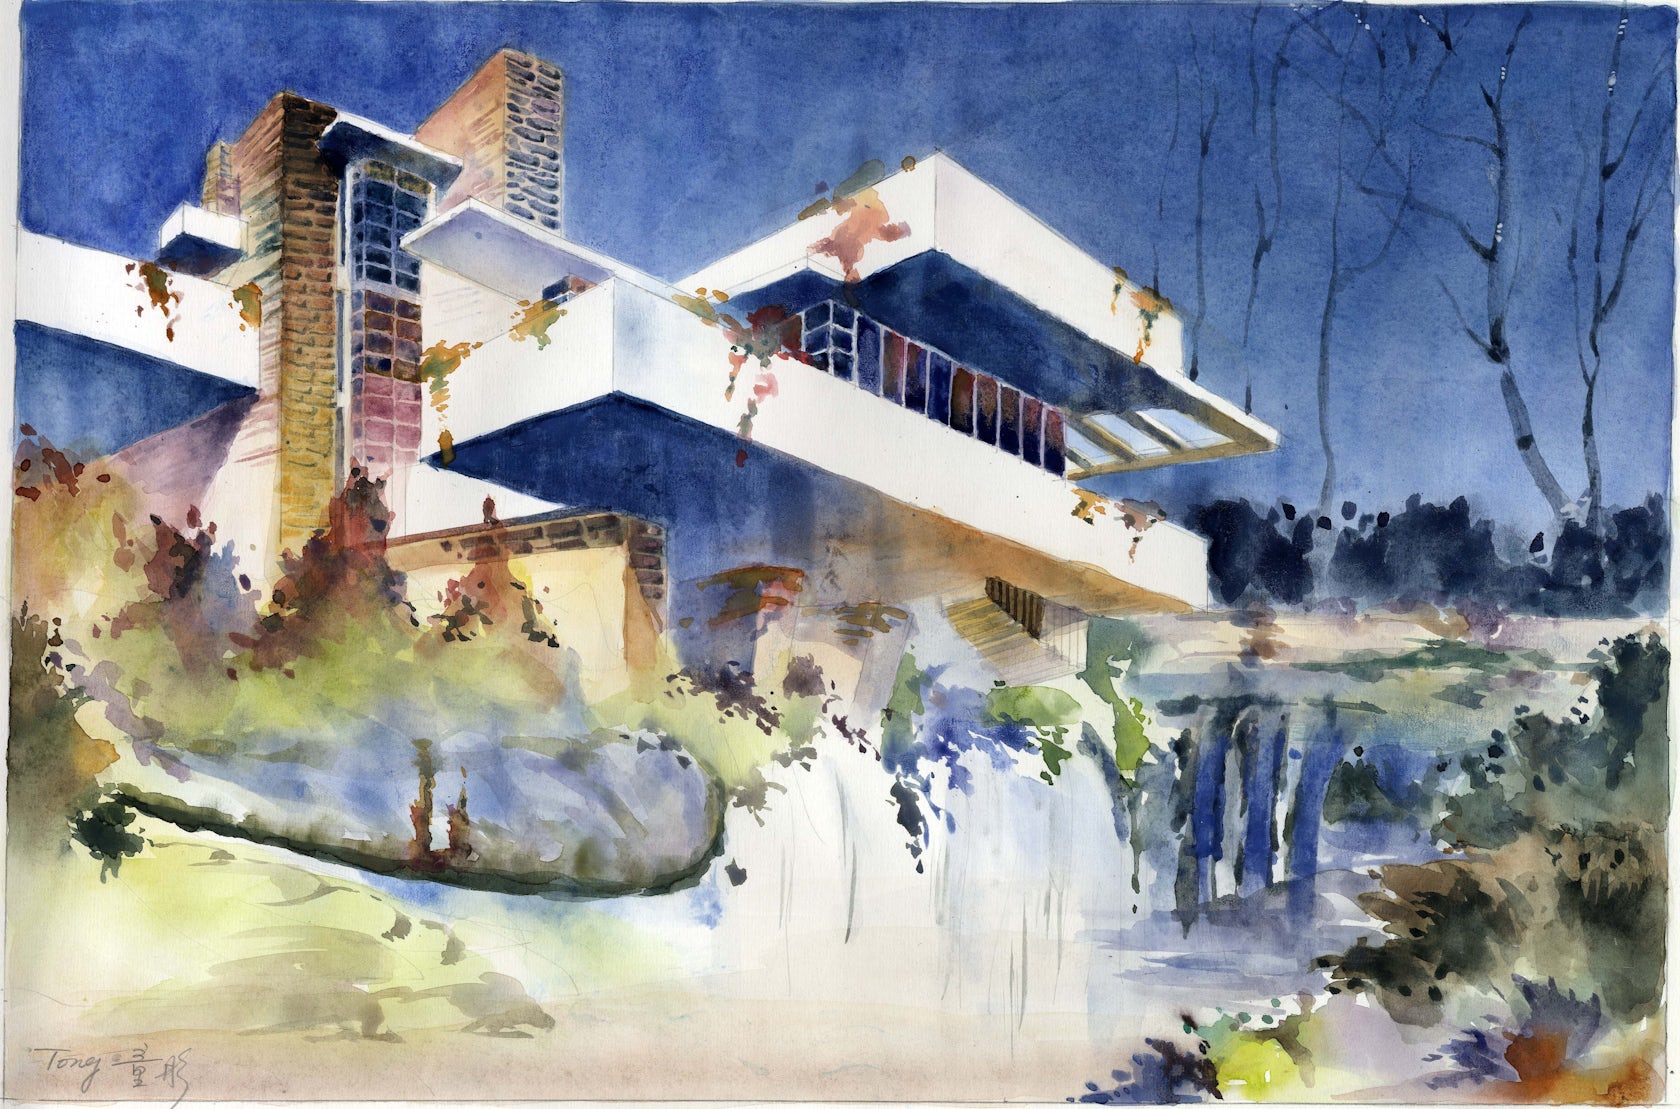 Watercolor rendering - Architizer